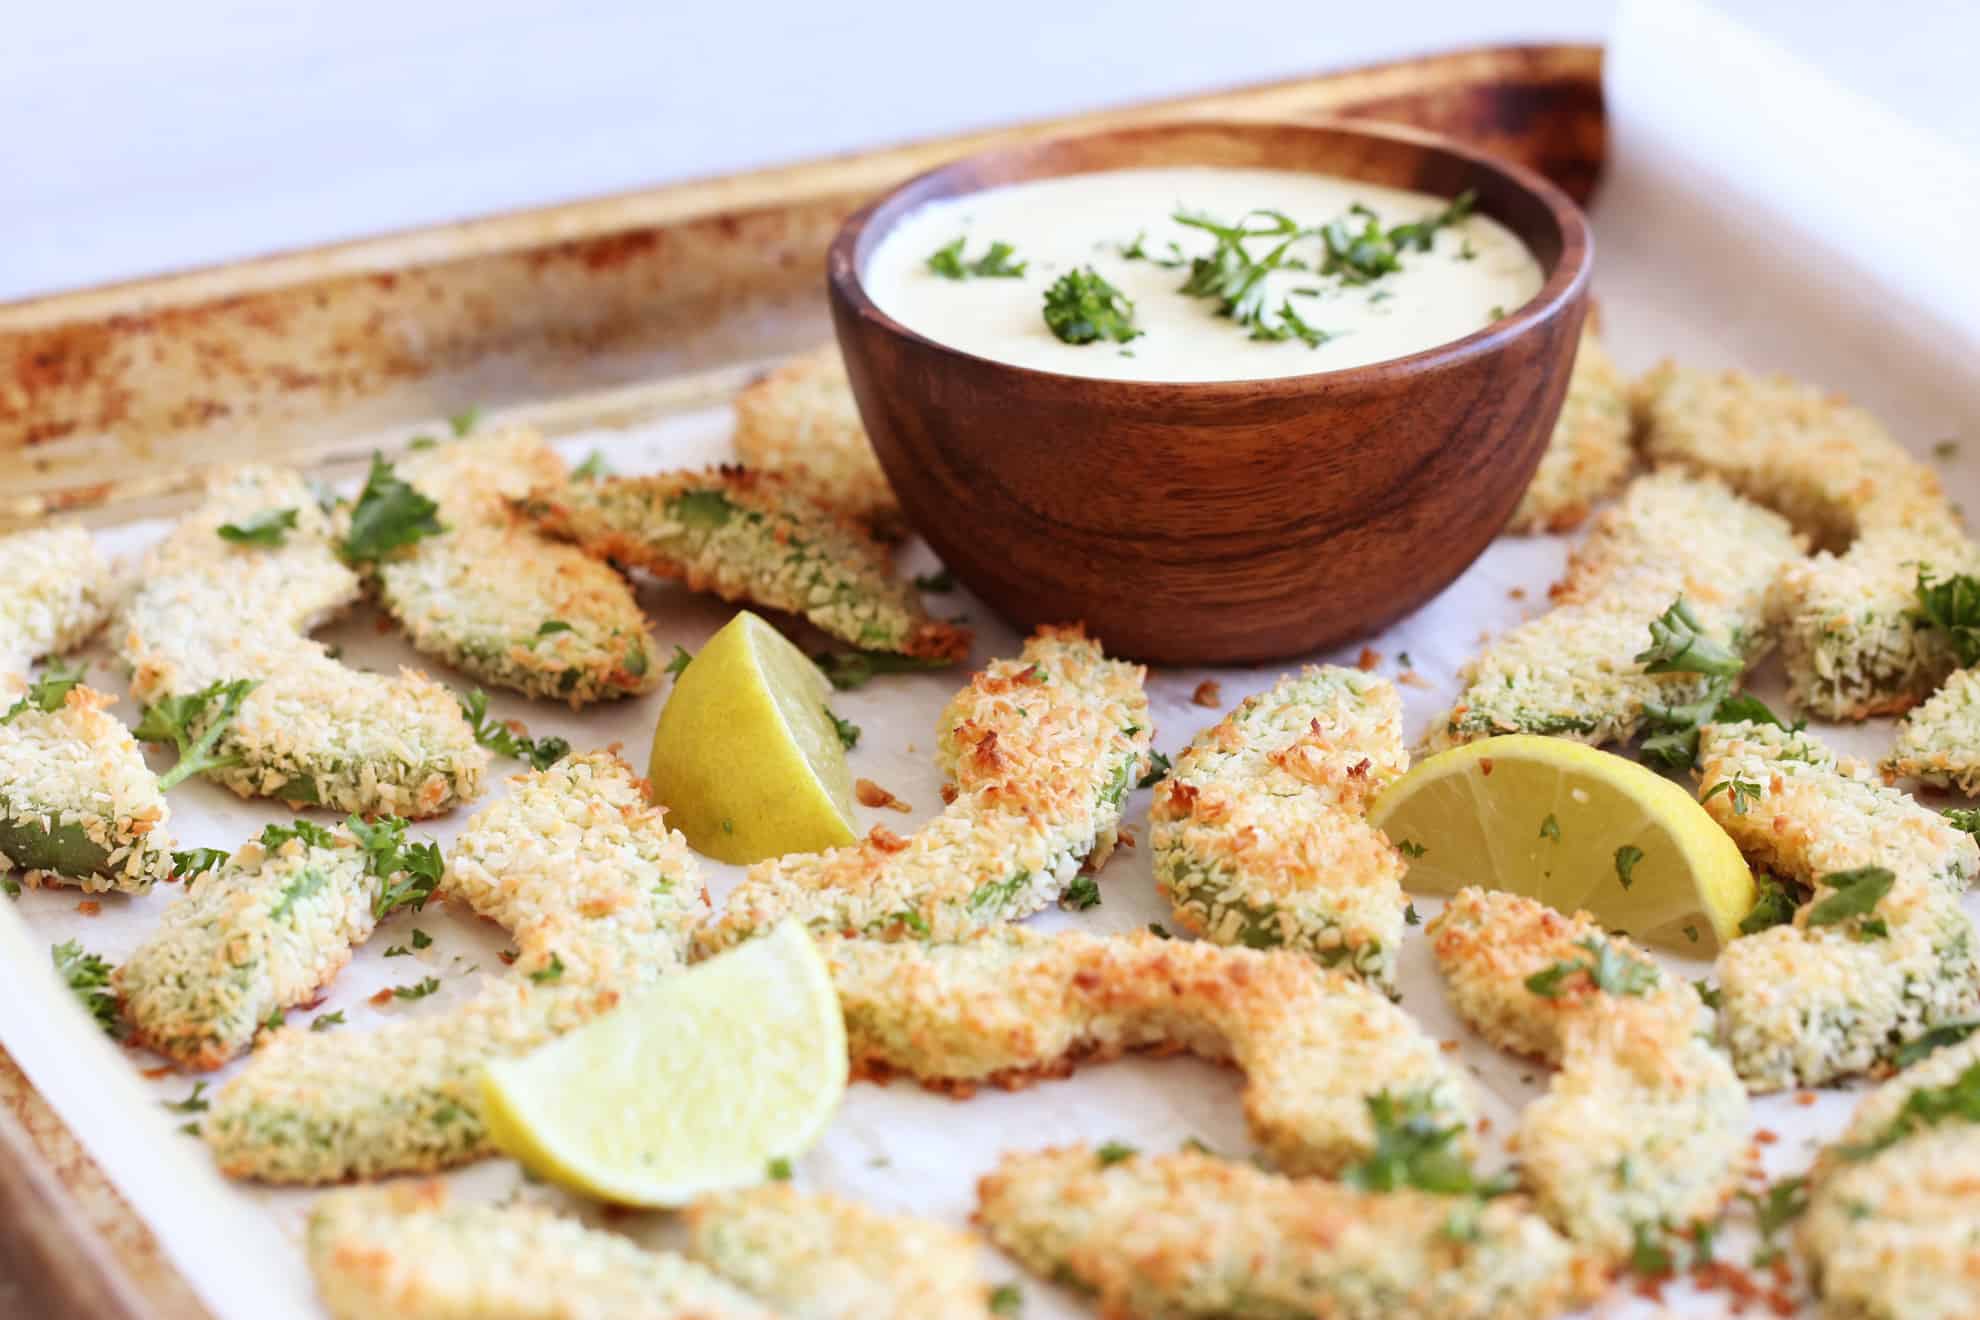 Coconut Crusted Avocado Fries